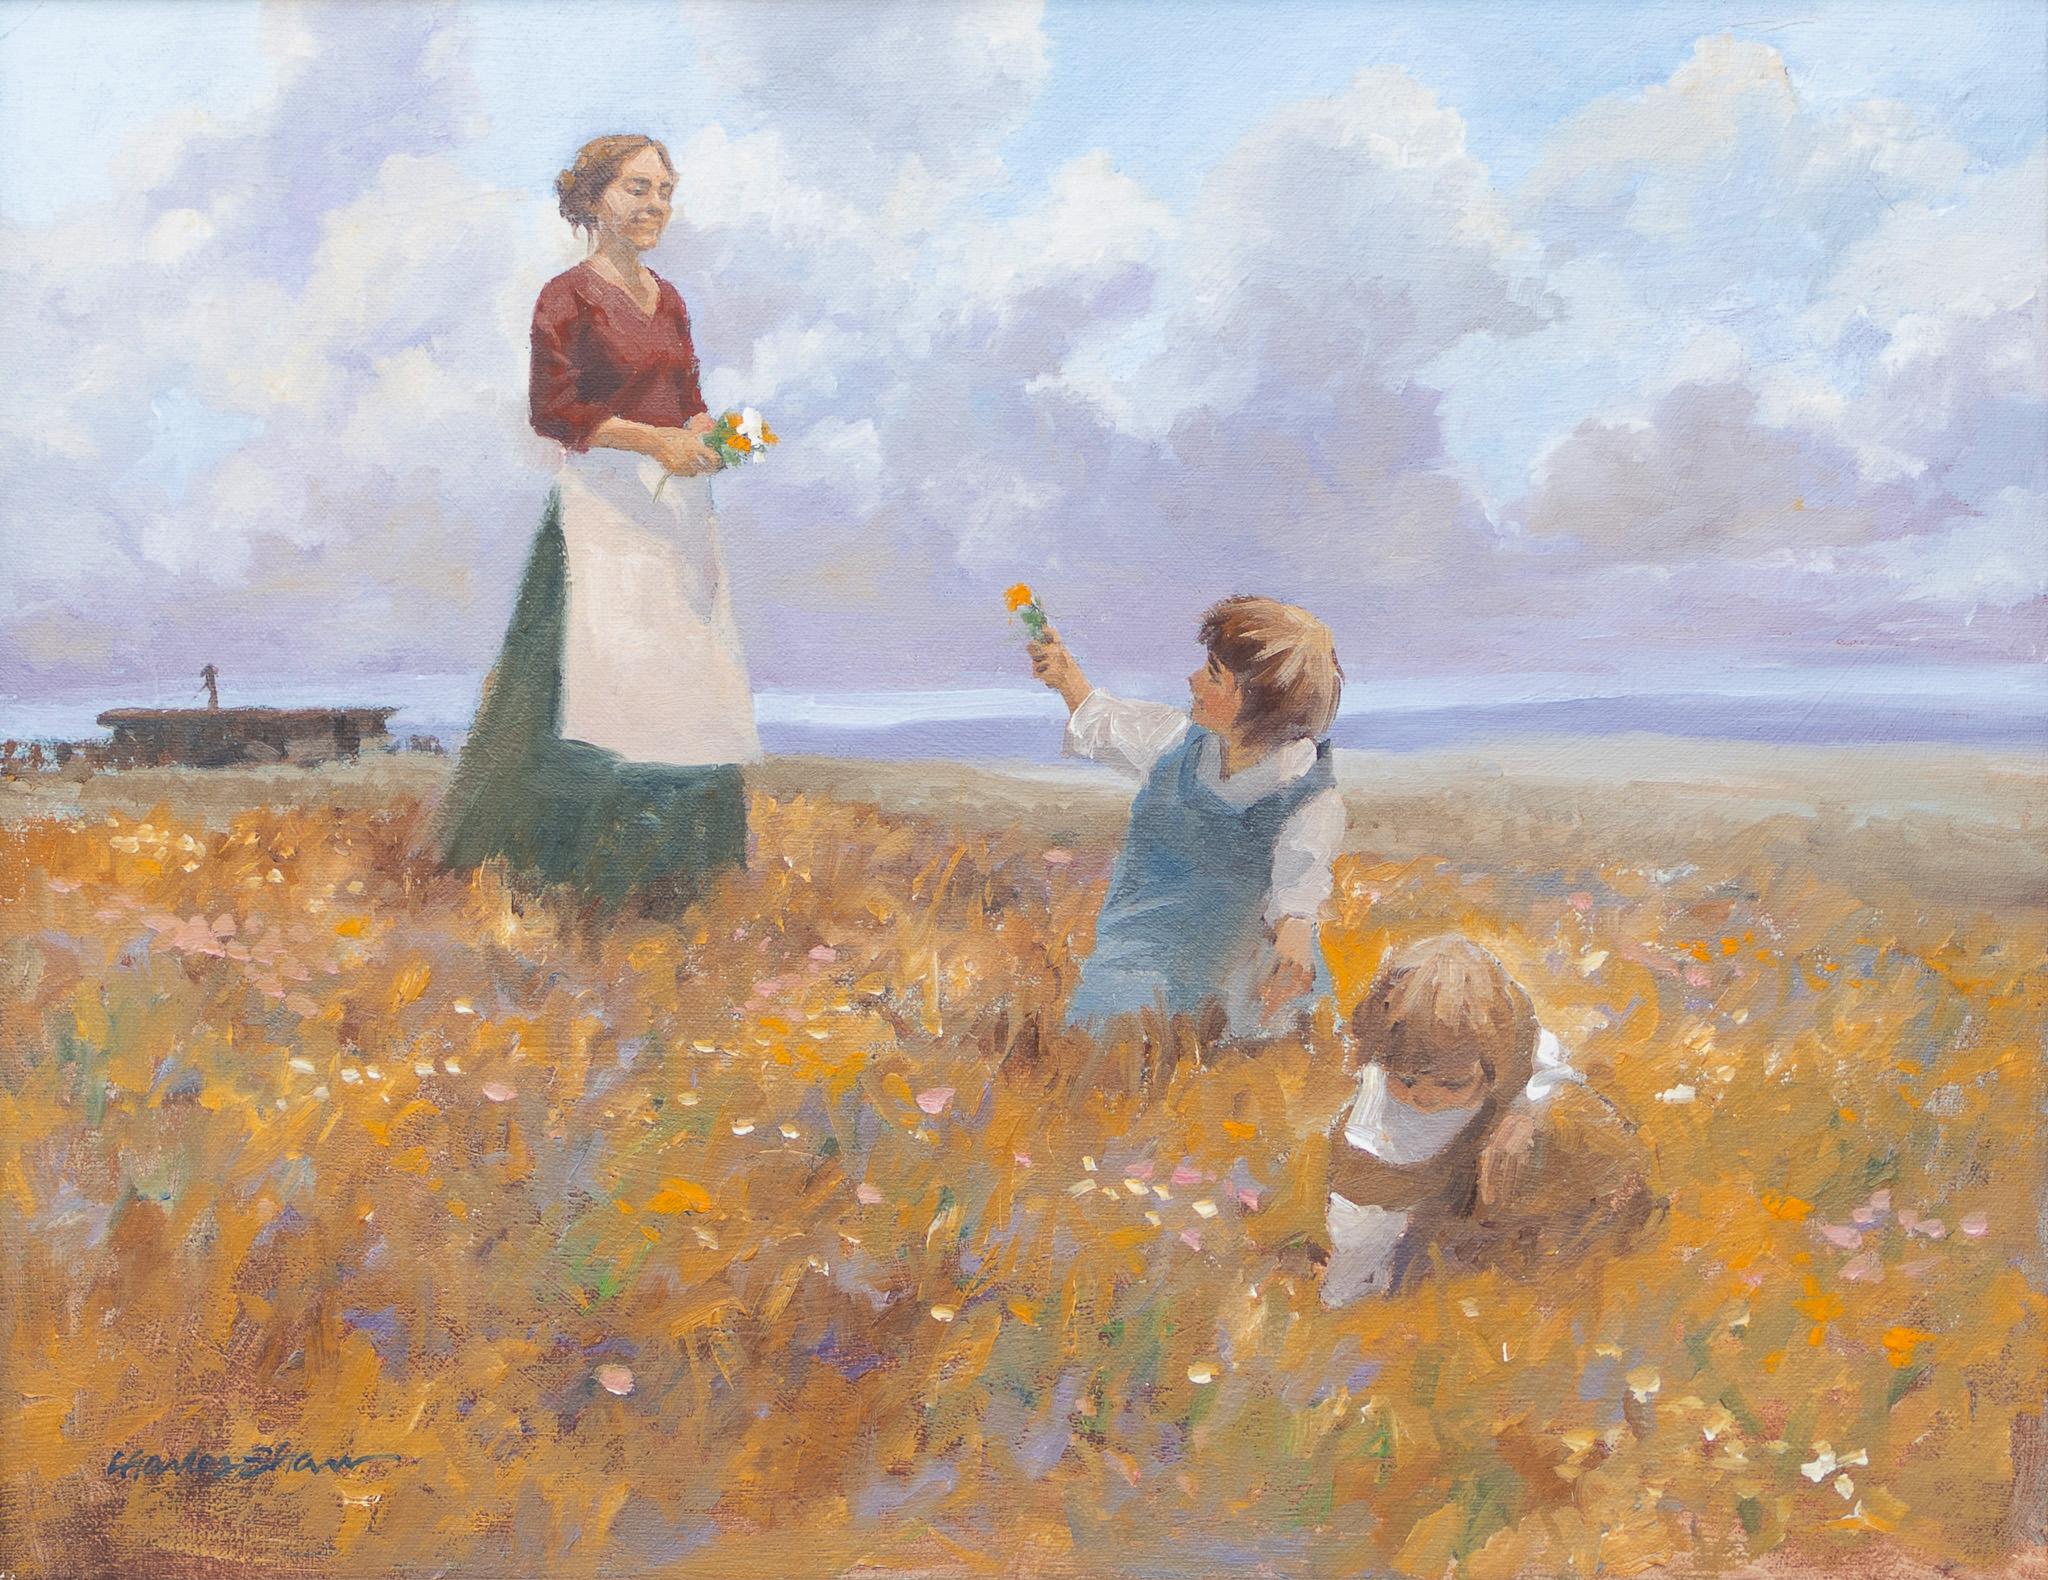 Charles Shaw Figurative Painting - "Mother and Children"